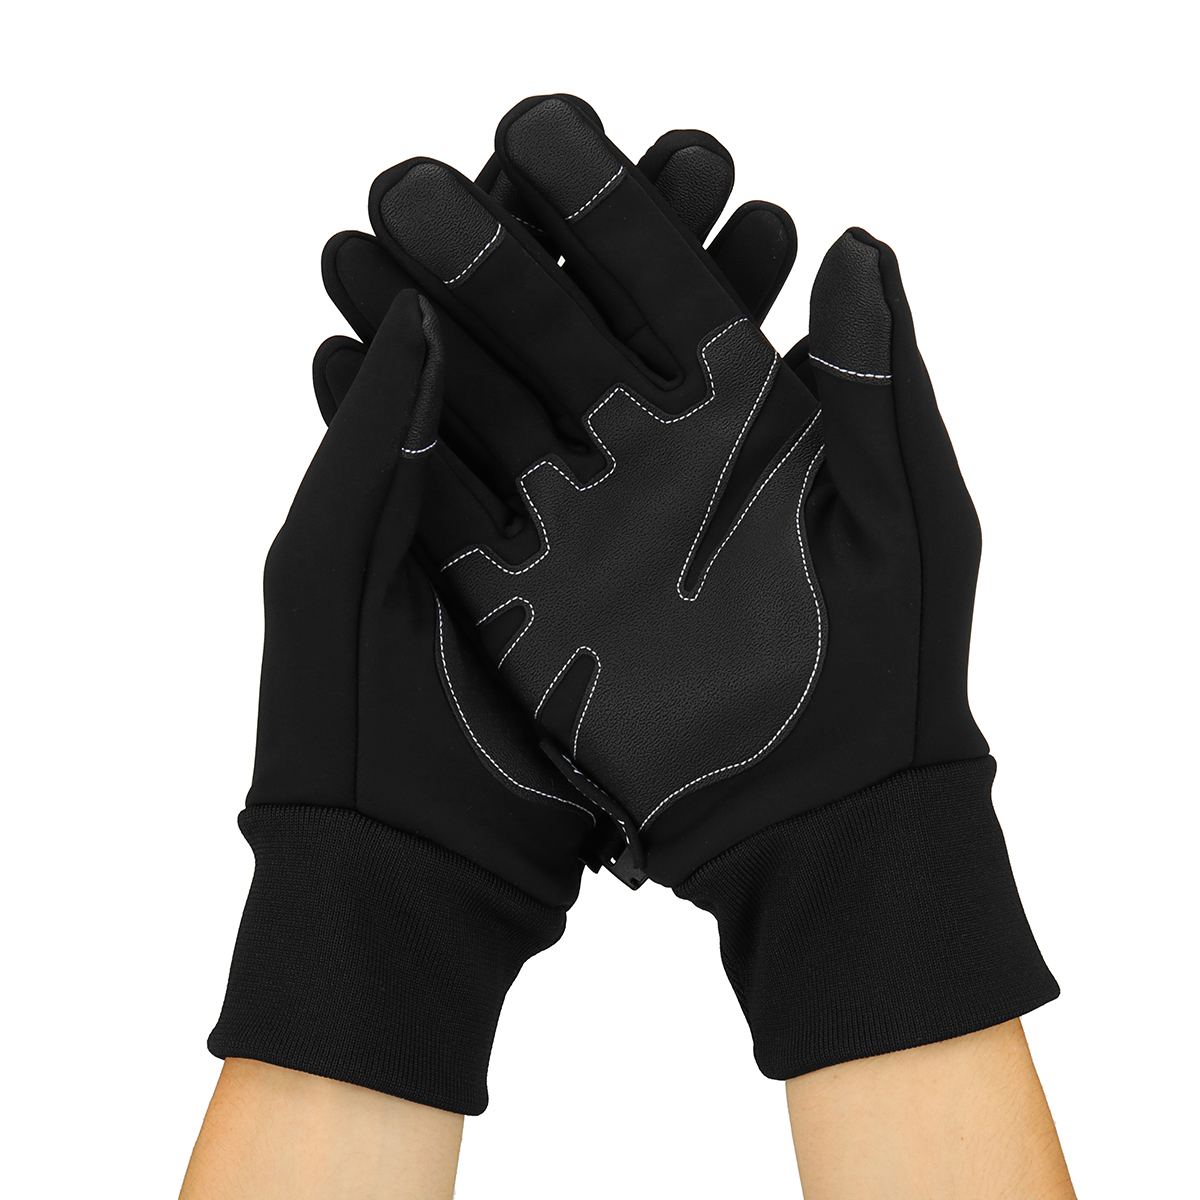 Find Winter Warm Waterproof 3 Finger Touch Sensitive Outdoors Motorcycle Riding Gloves with Reflective for Sale on Gipsybee.com with cryptocurrencies